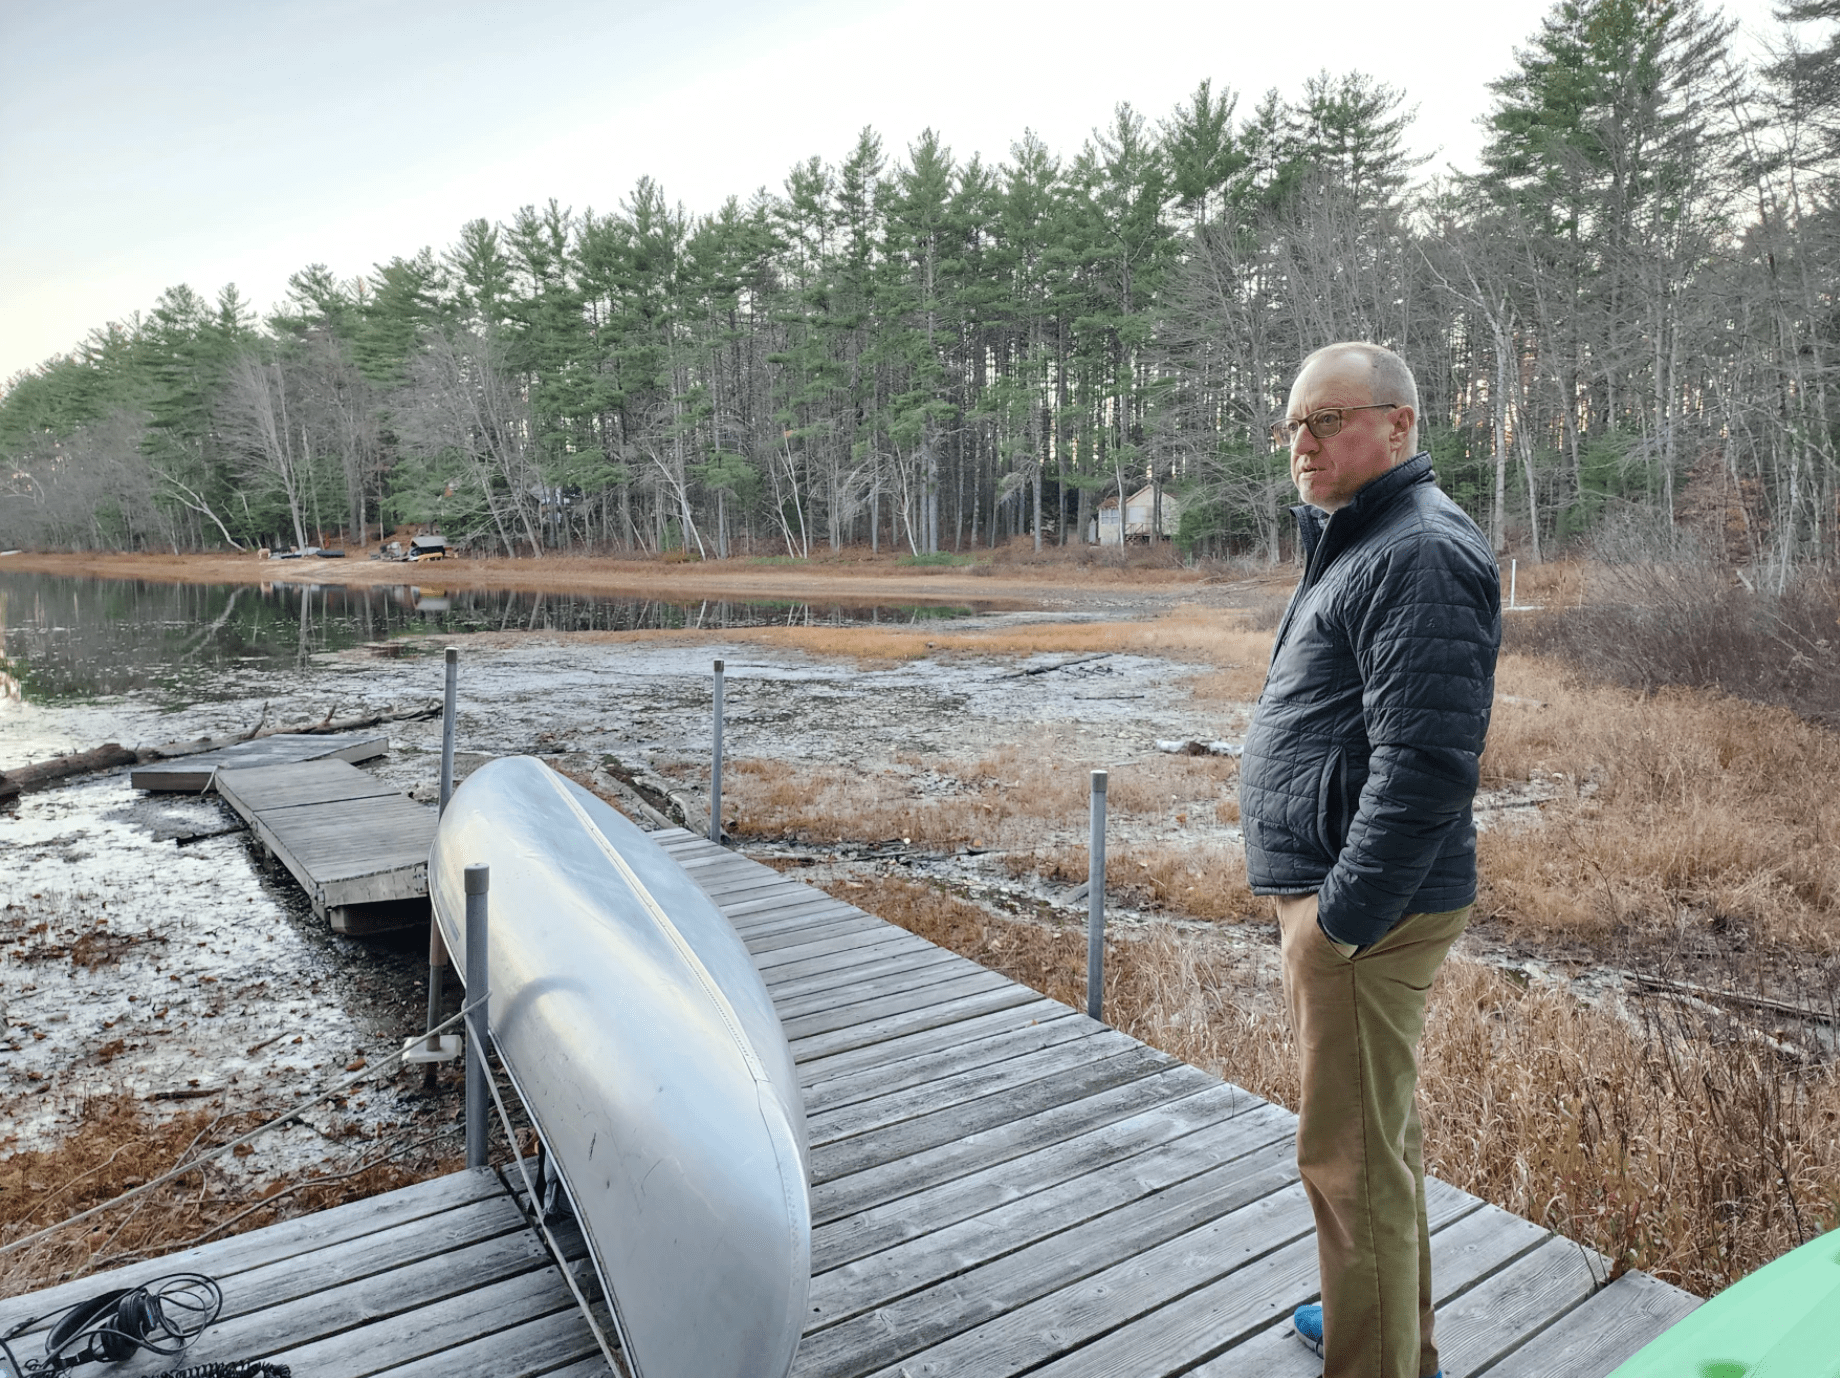 Jim Metivier stands next to the canoe on his dock on Long Pond in Denmark, Maine, in Nov. 2022. Susan Sharon/Maine Public)